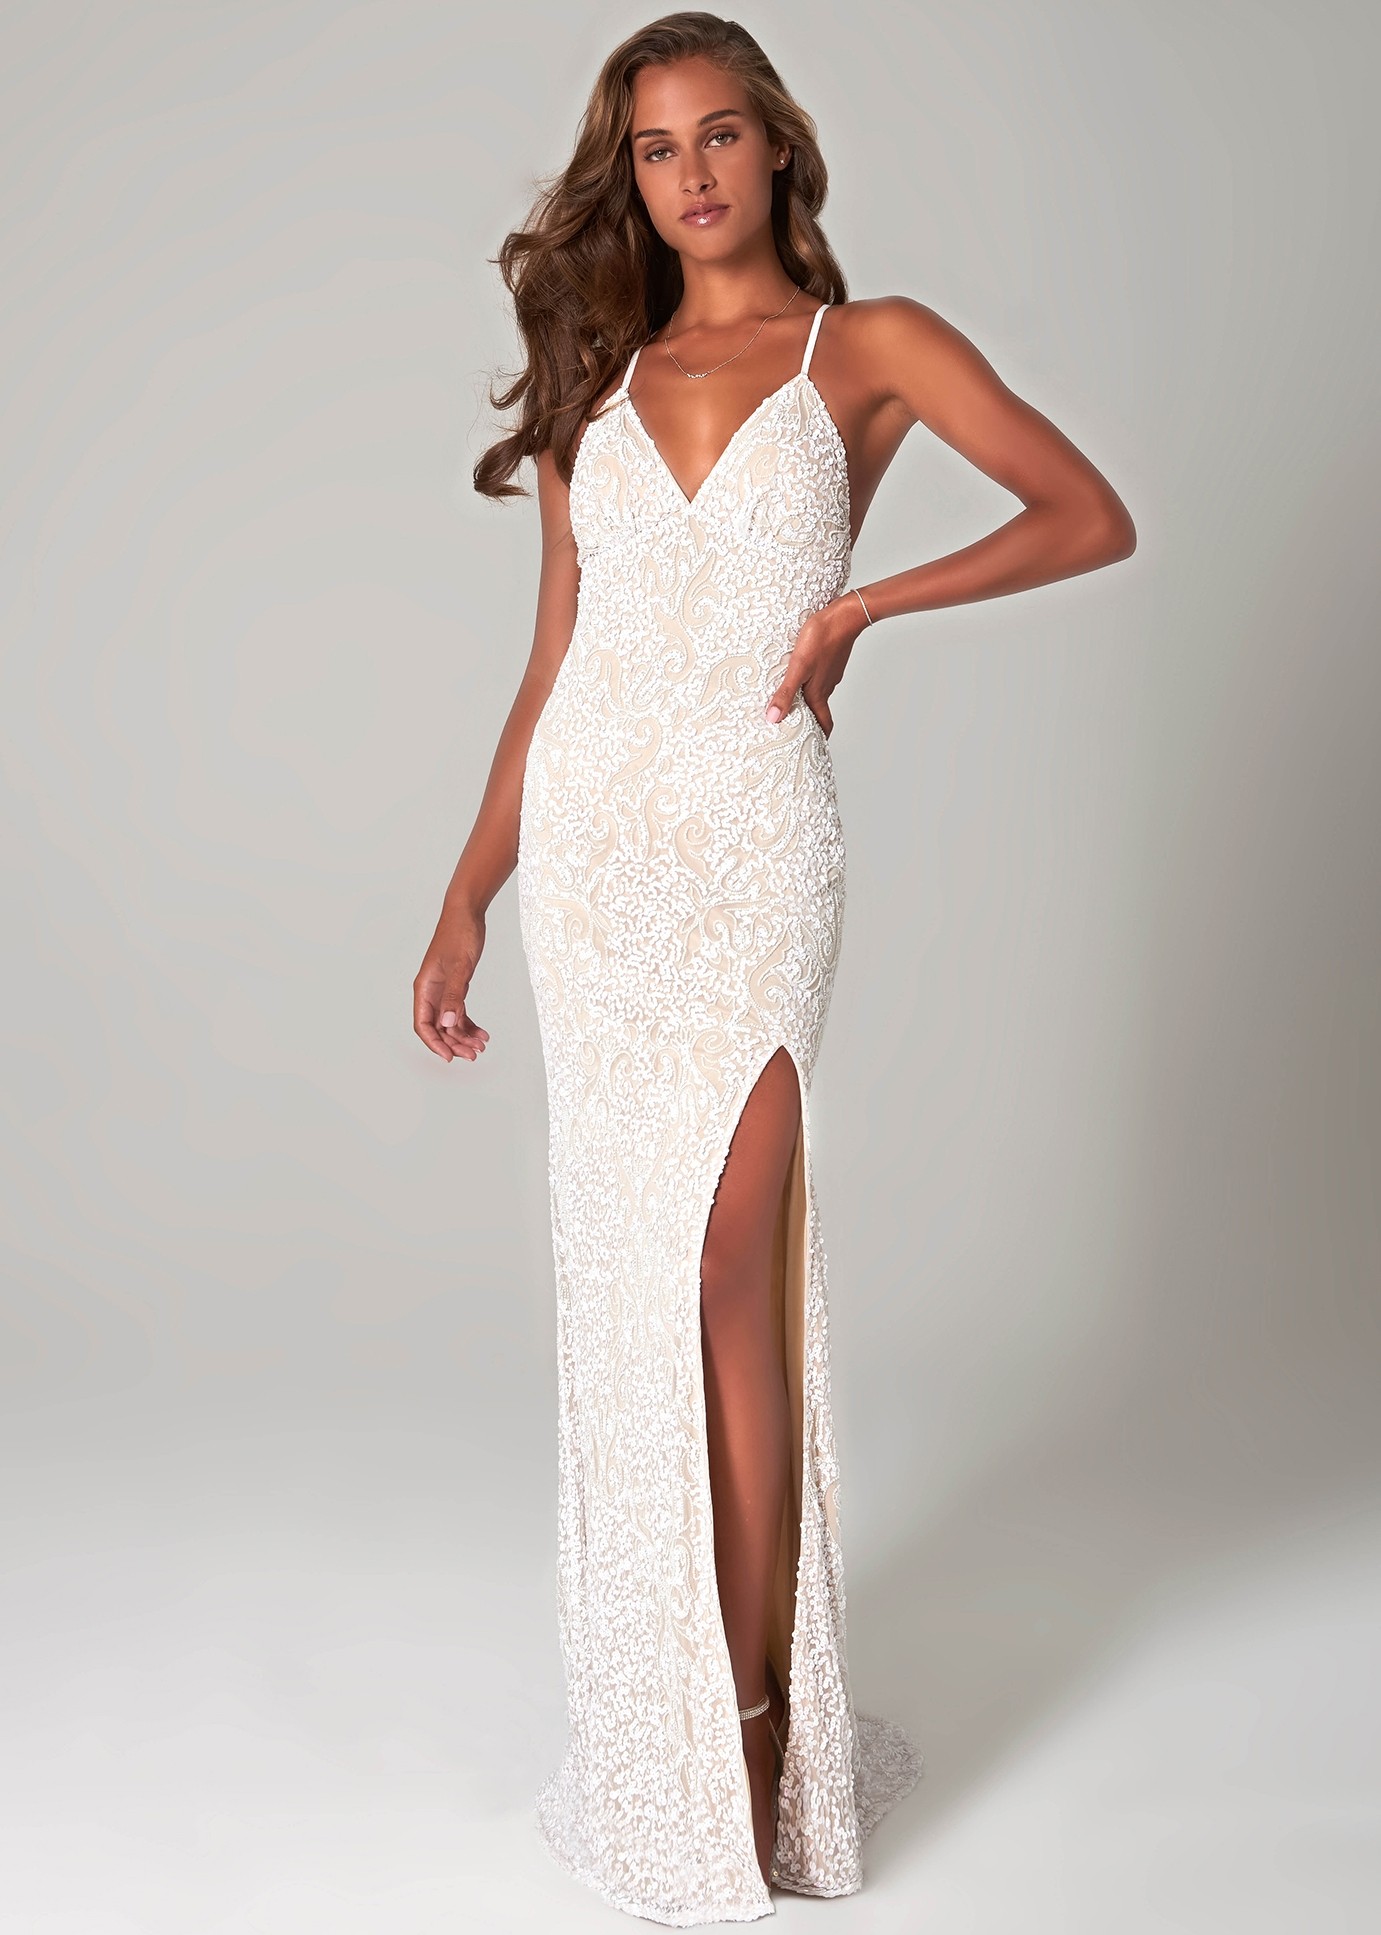 Scala 48977 Open Back V-Neck Sequin Gown